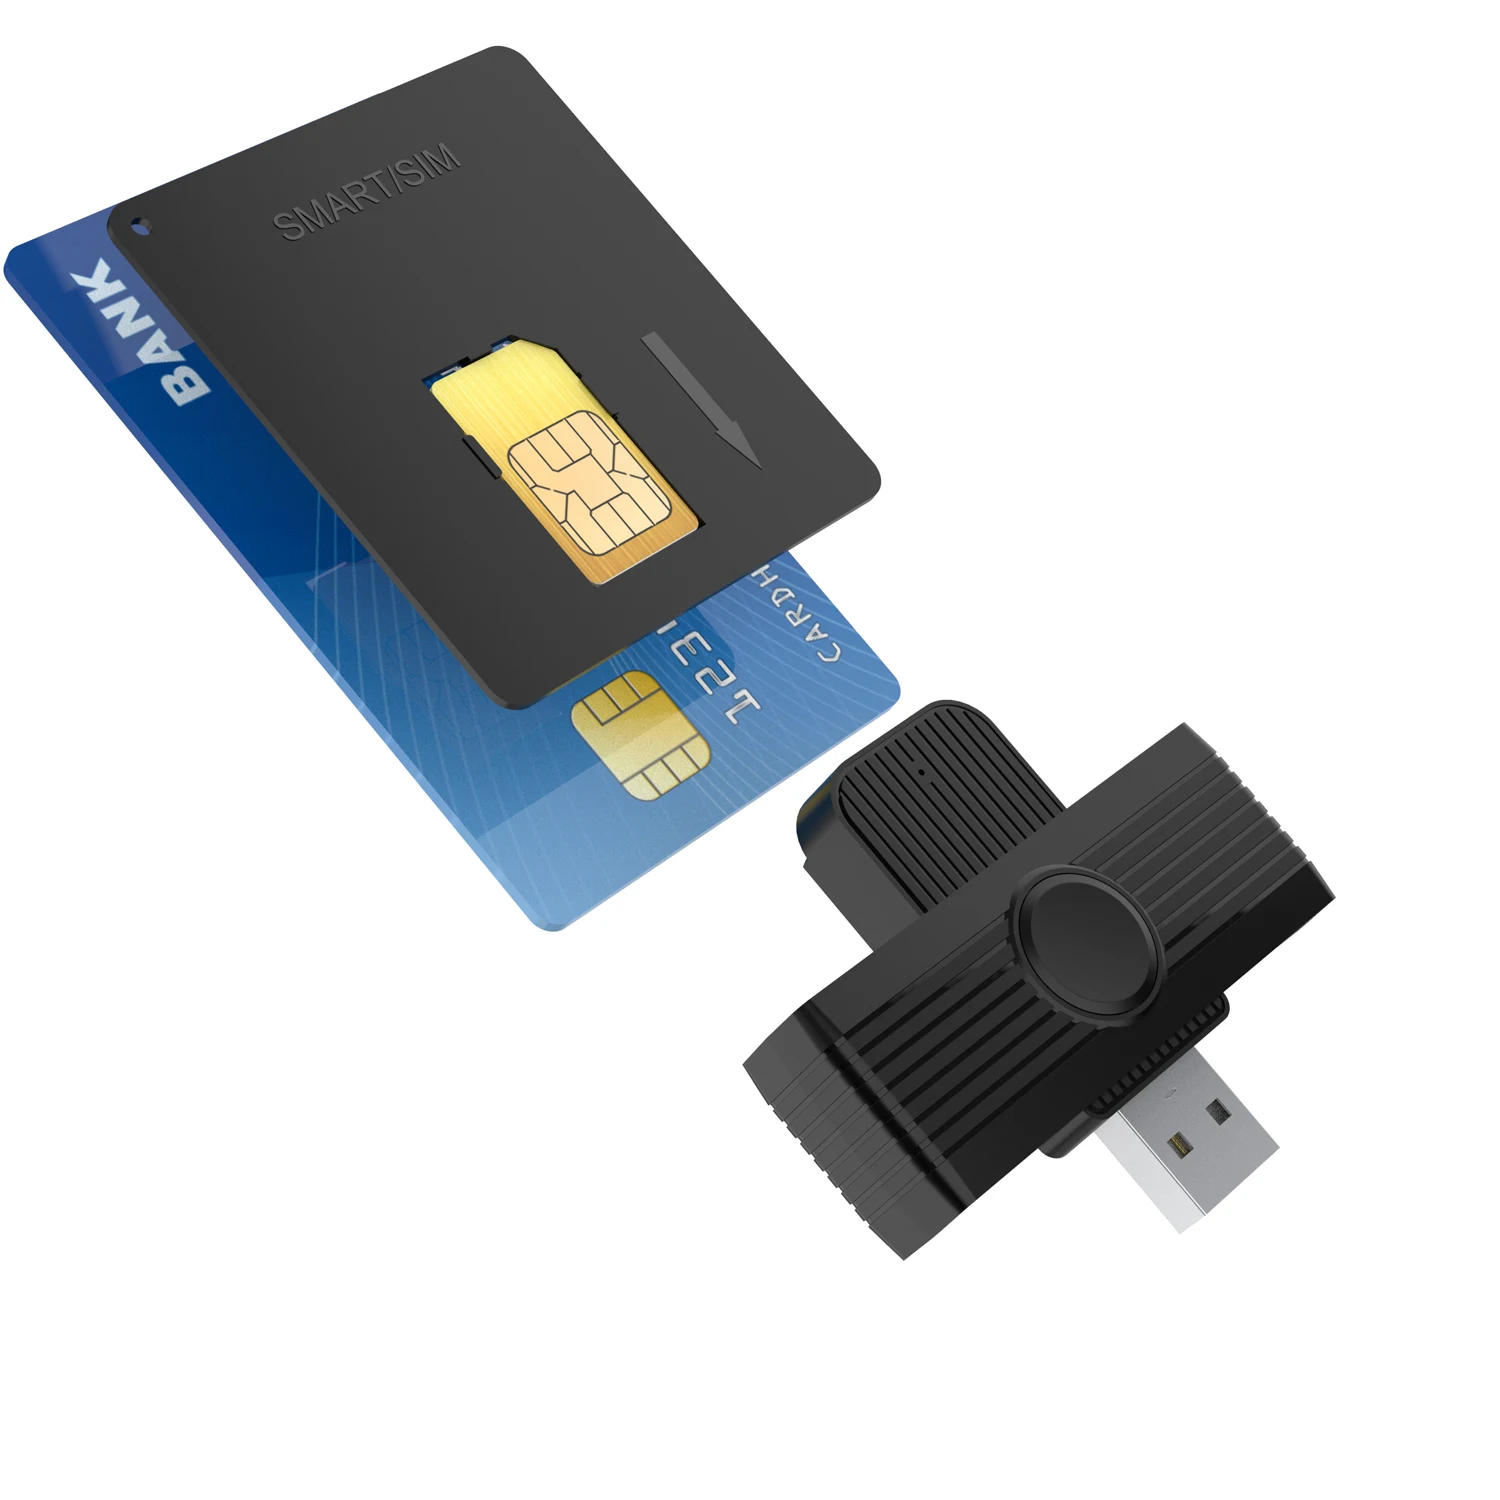 

Mobile phone sim card CAC IC ID iso 7816 ATM usb smart chip card reader writer